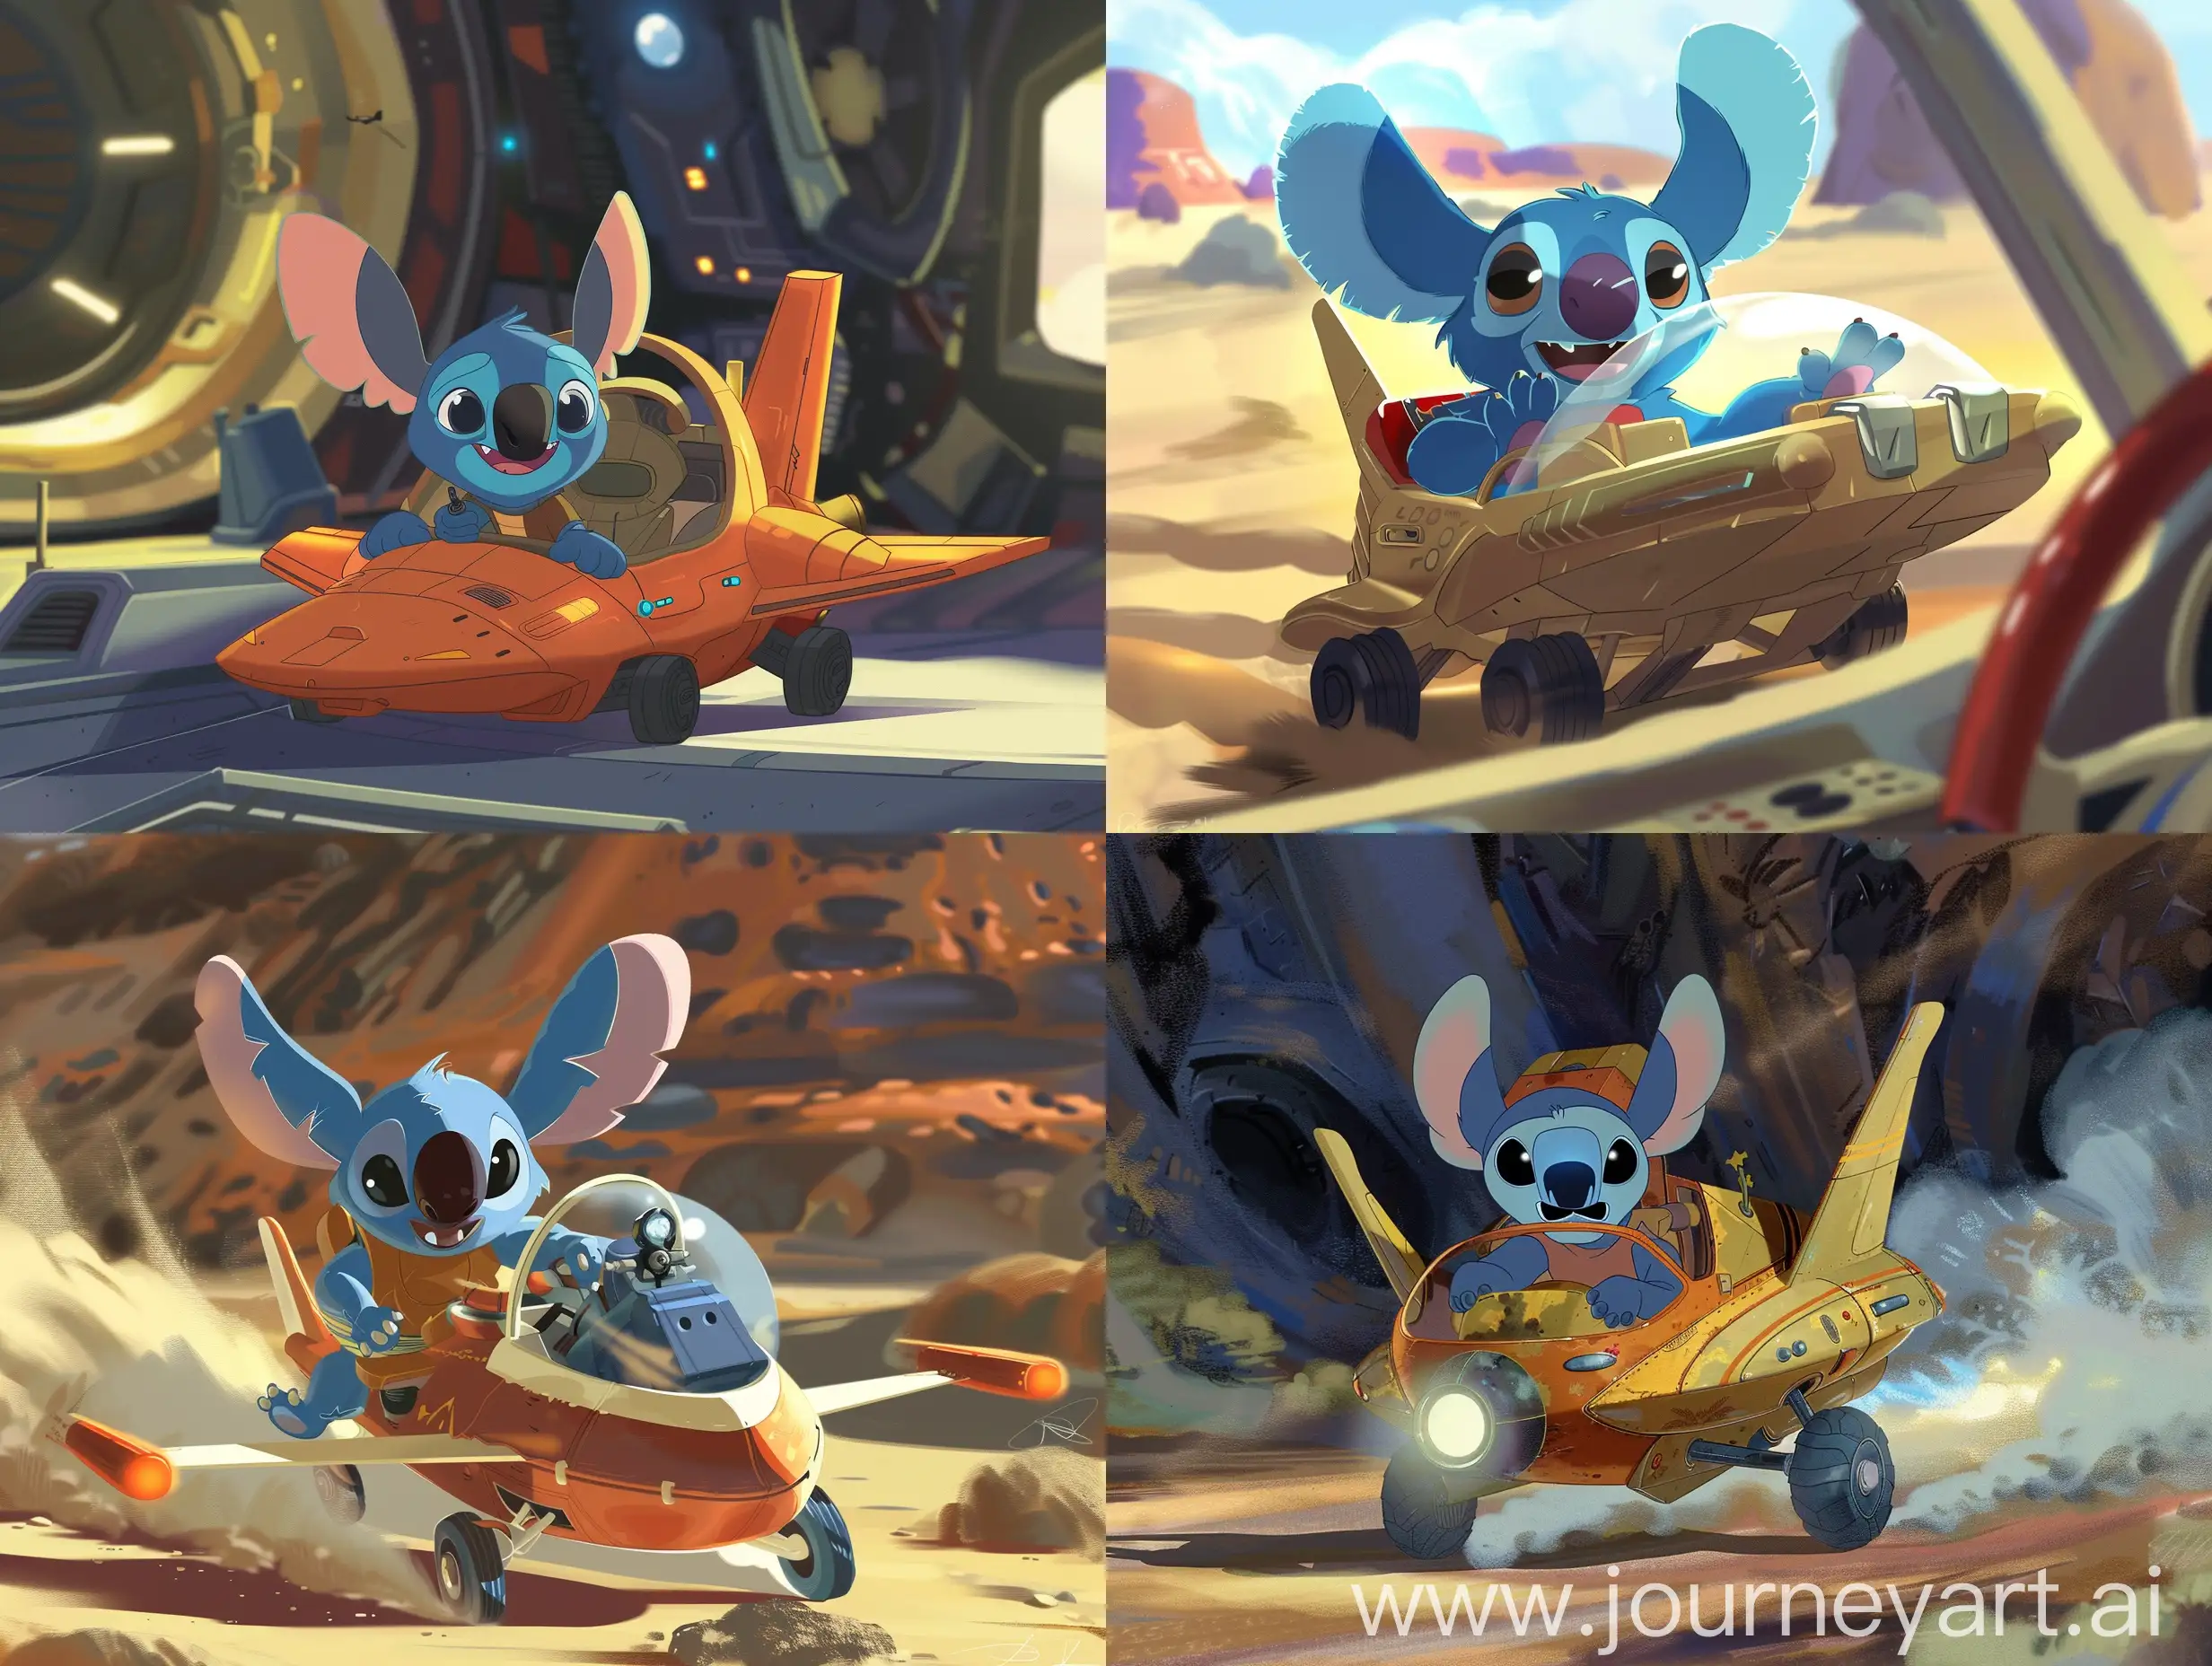 Stitch-Pilots-a-Small-Spaceship-in-Disney-Cartoon-Style